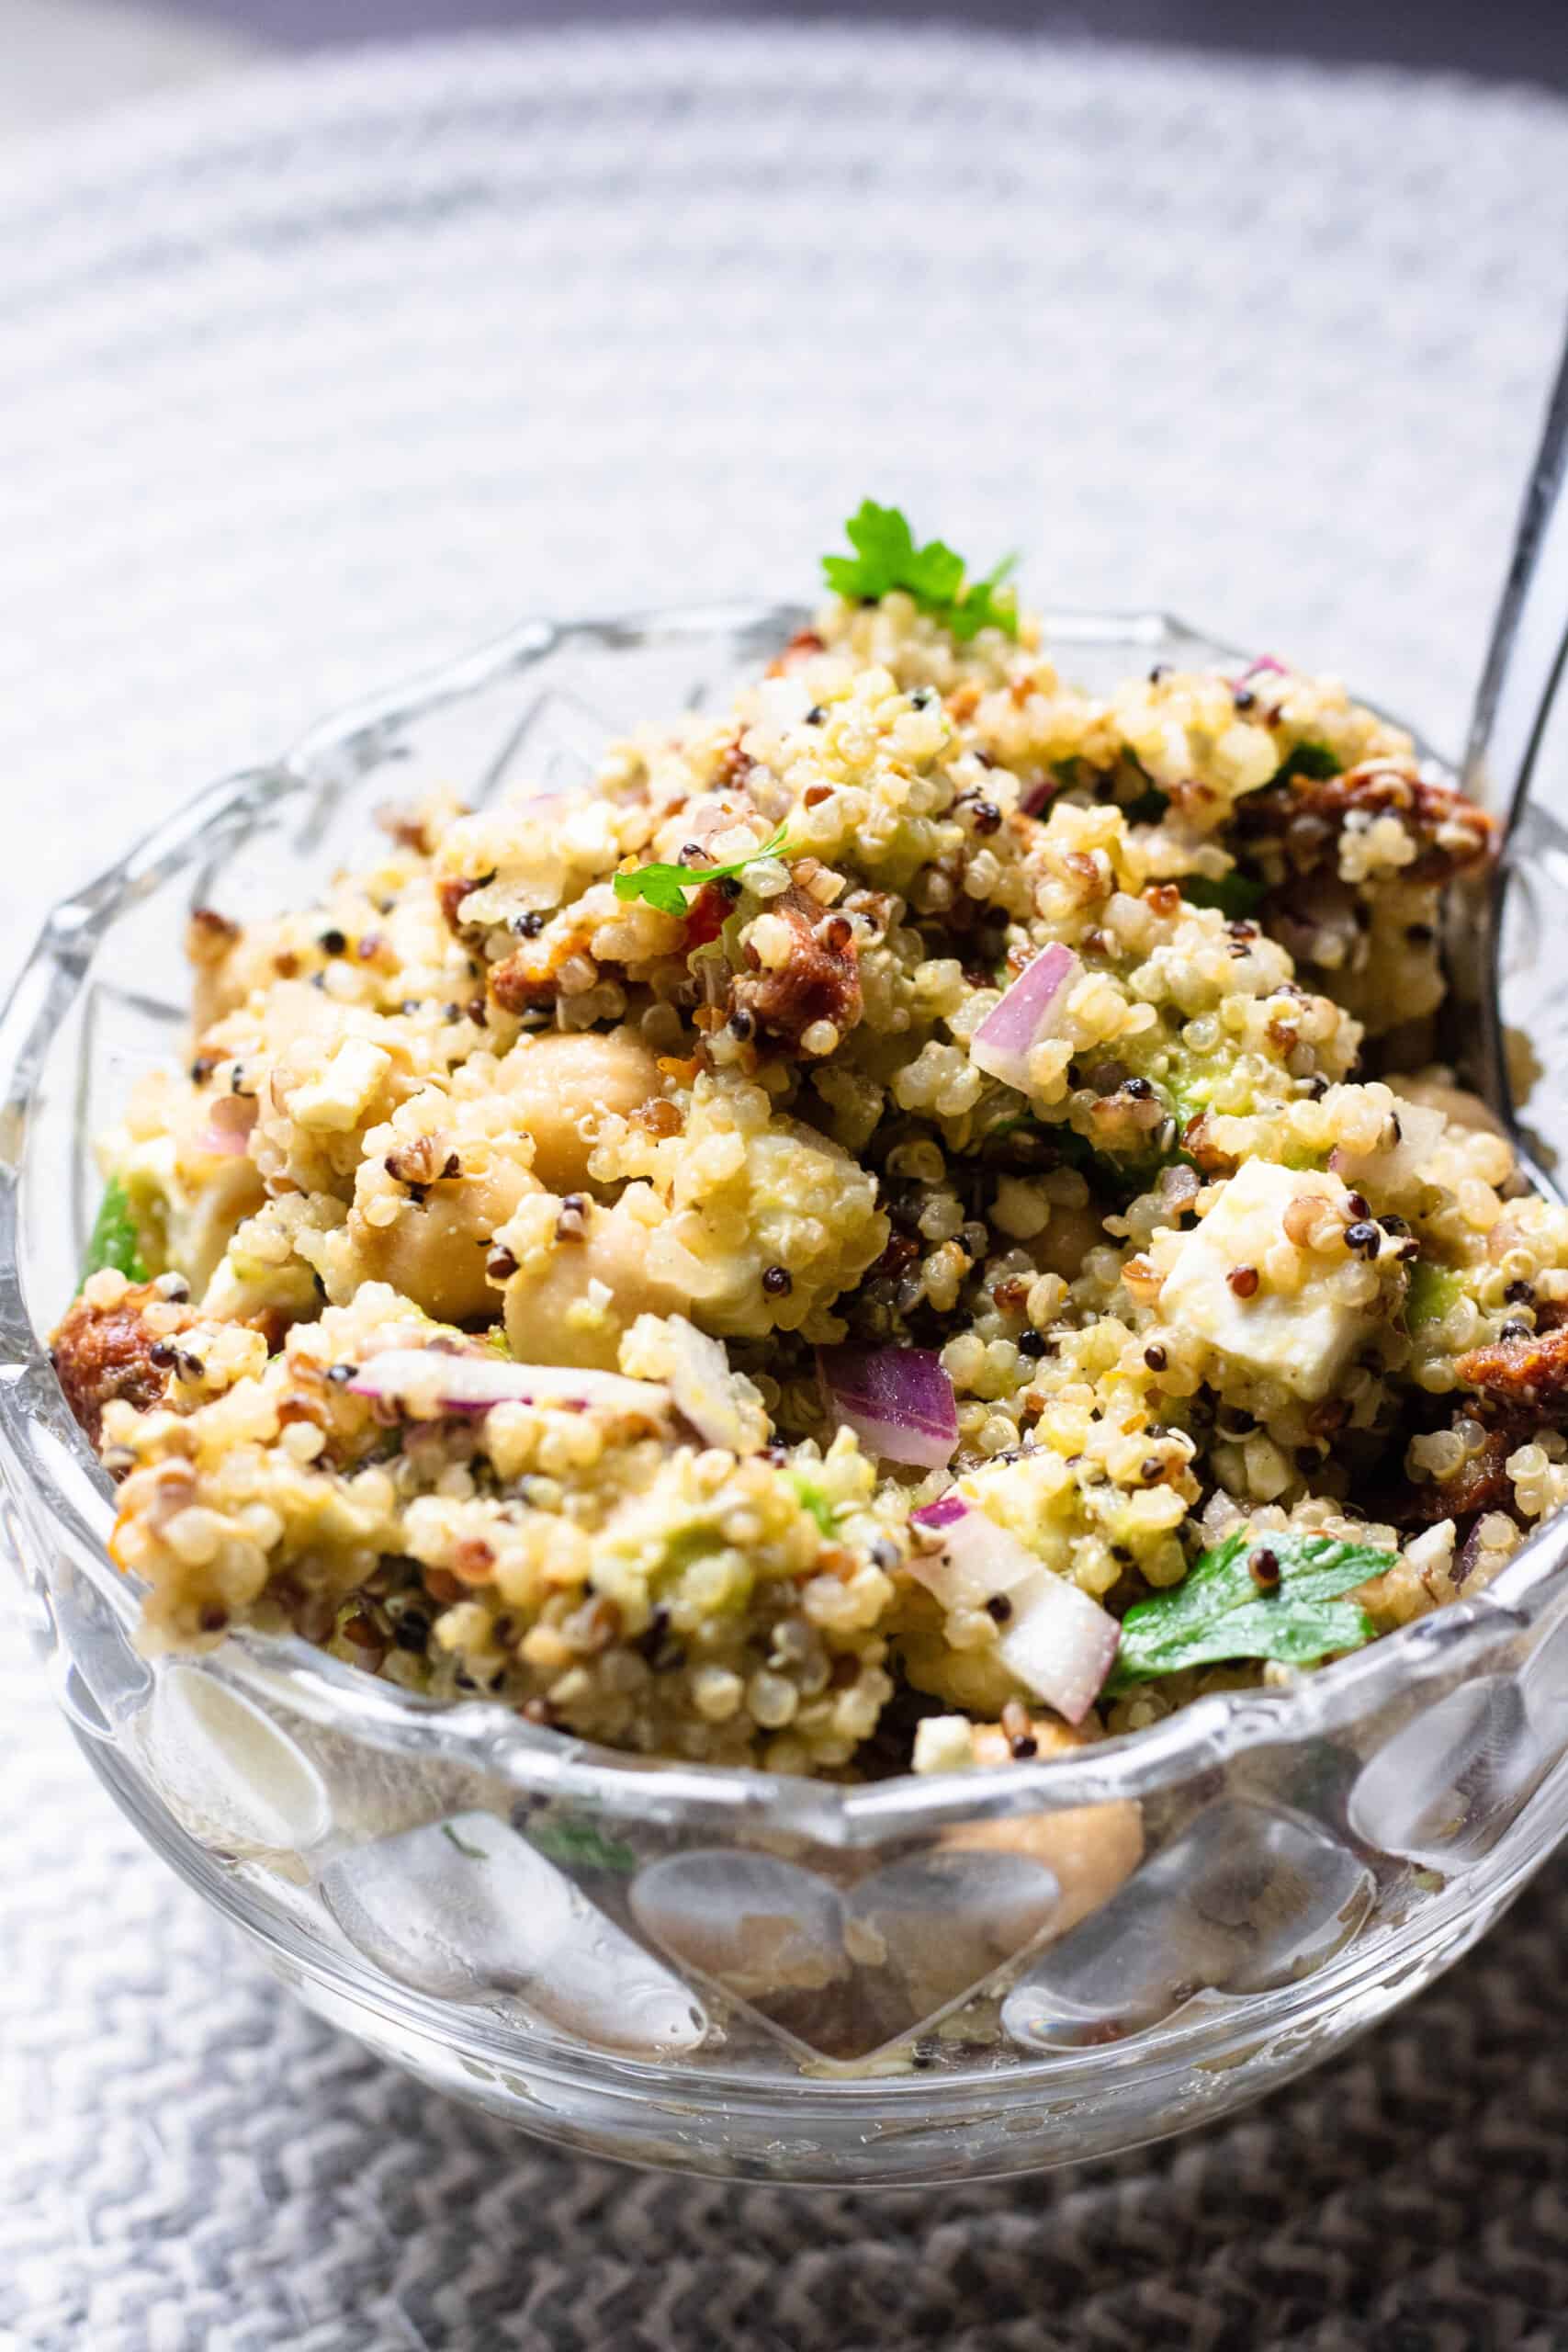 Quinoa salad in a glass bowl mixed with red onions, cheese, and chickpeas.